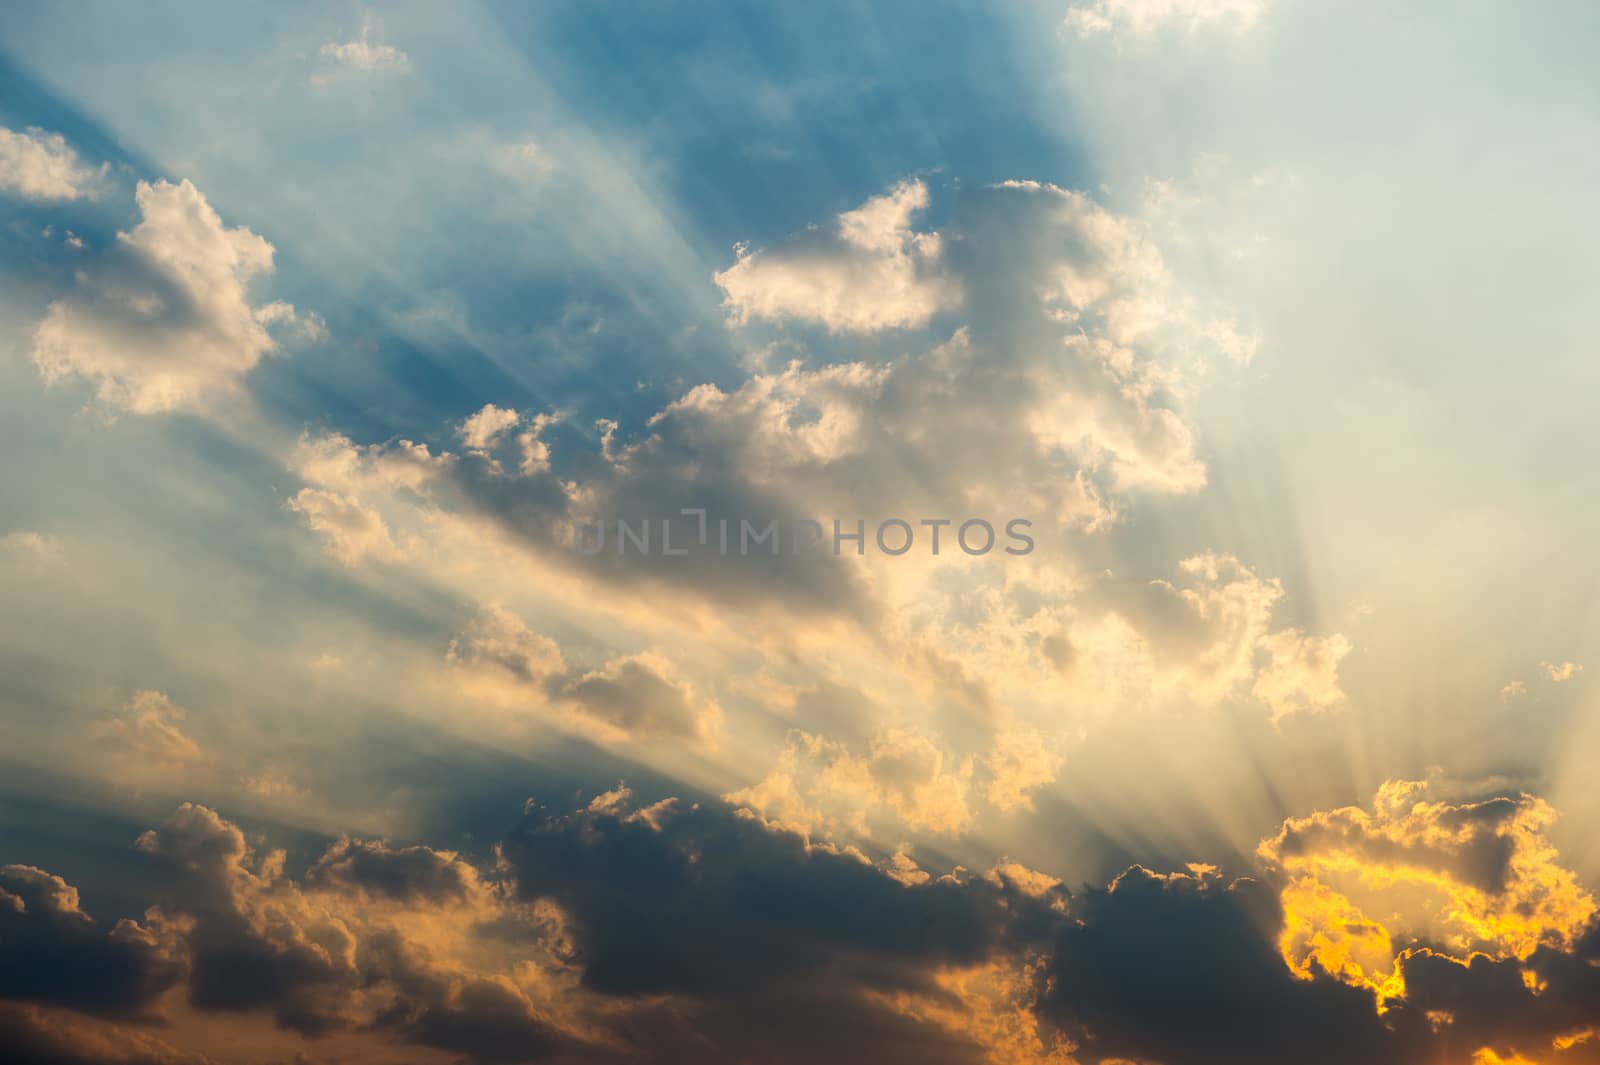 Abstract background of clouds sky with sunlight effect